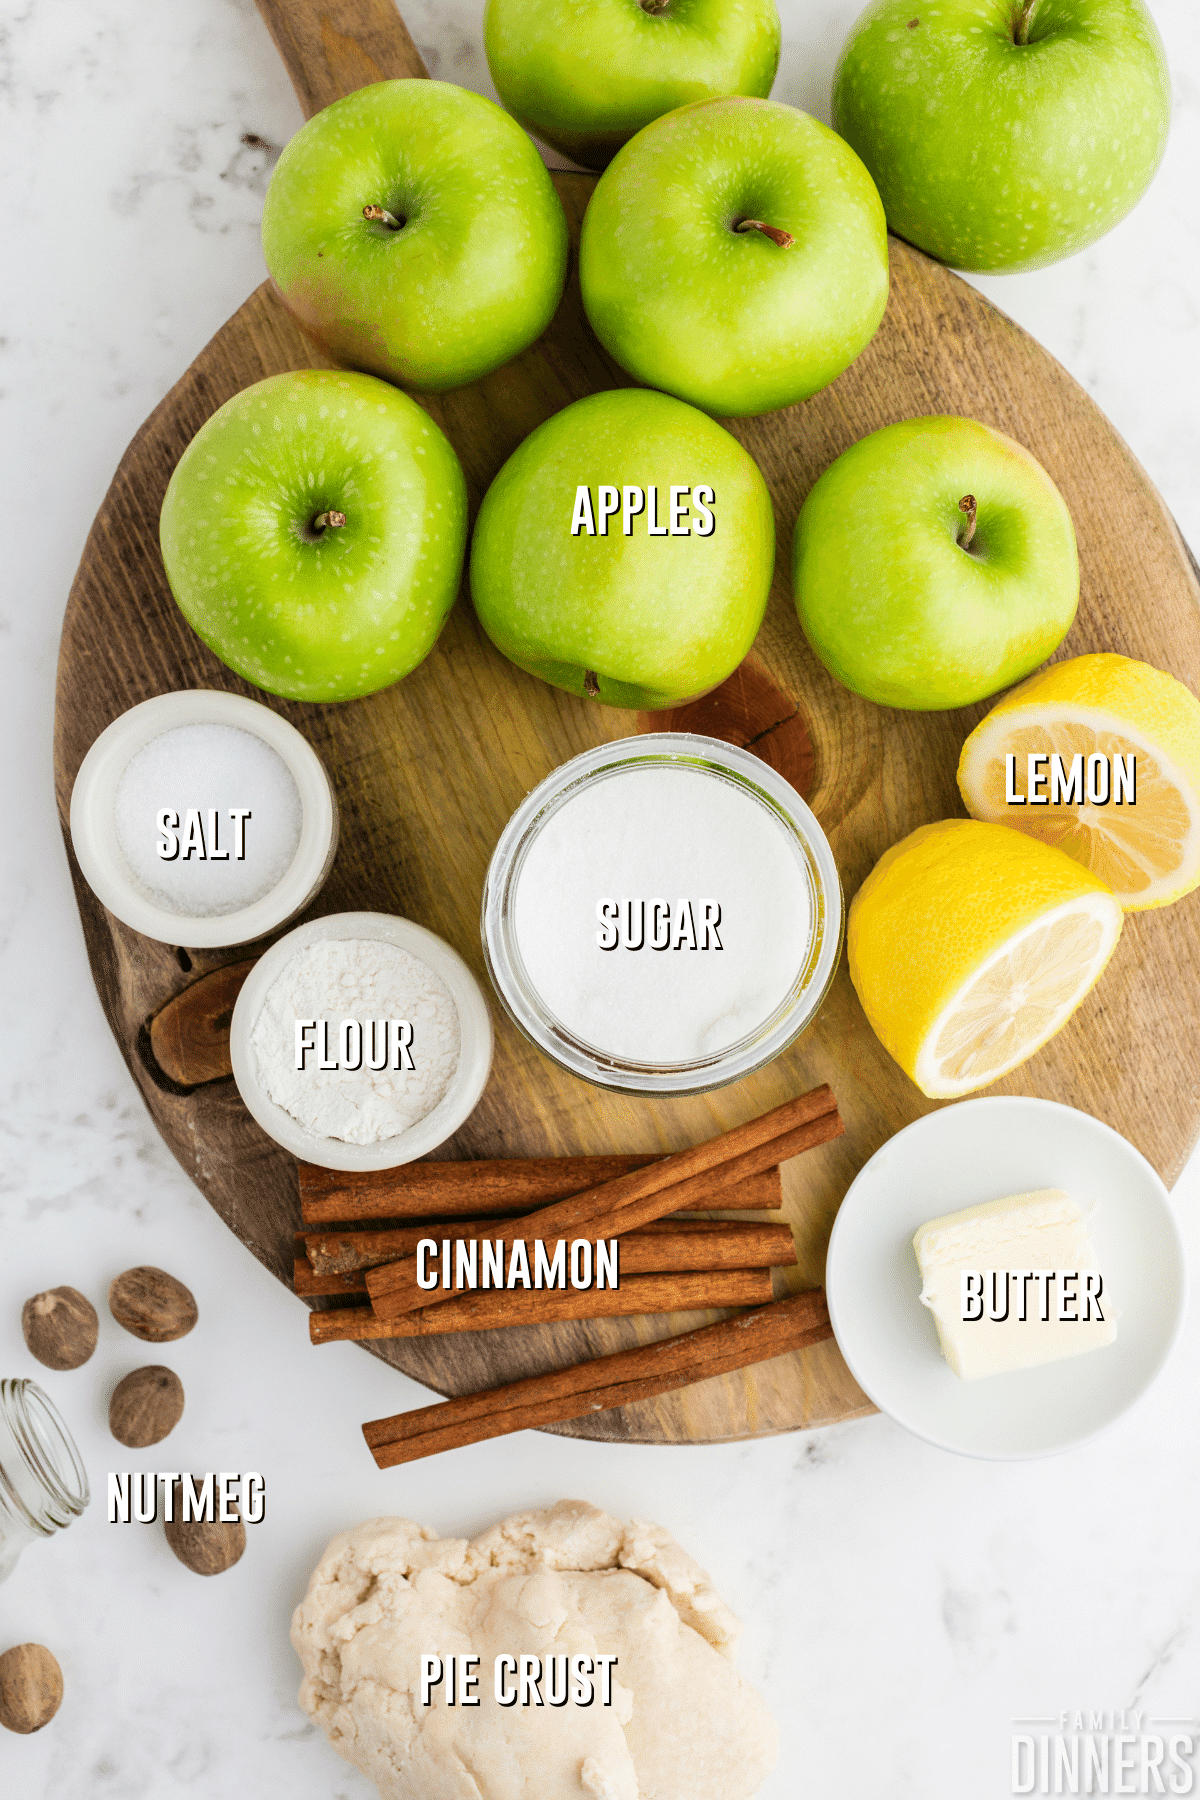 apple pie filling ingredients on a cutting board. 7 green granny smith apples, small bowl of salt, flour, sugar, 5 cinnamon sticks and 5 nutmegs, and a lemon cut in half.